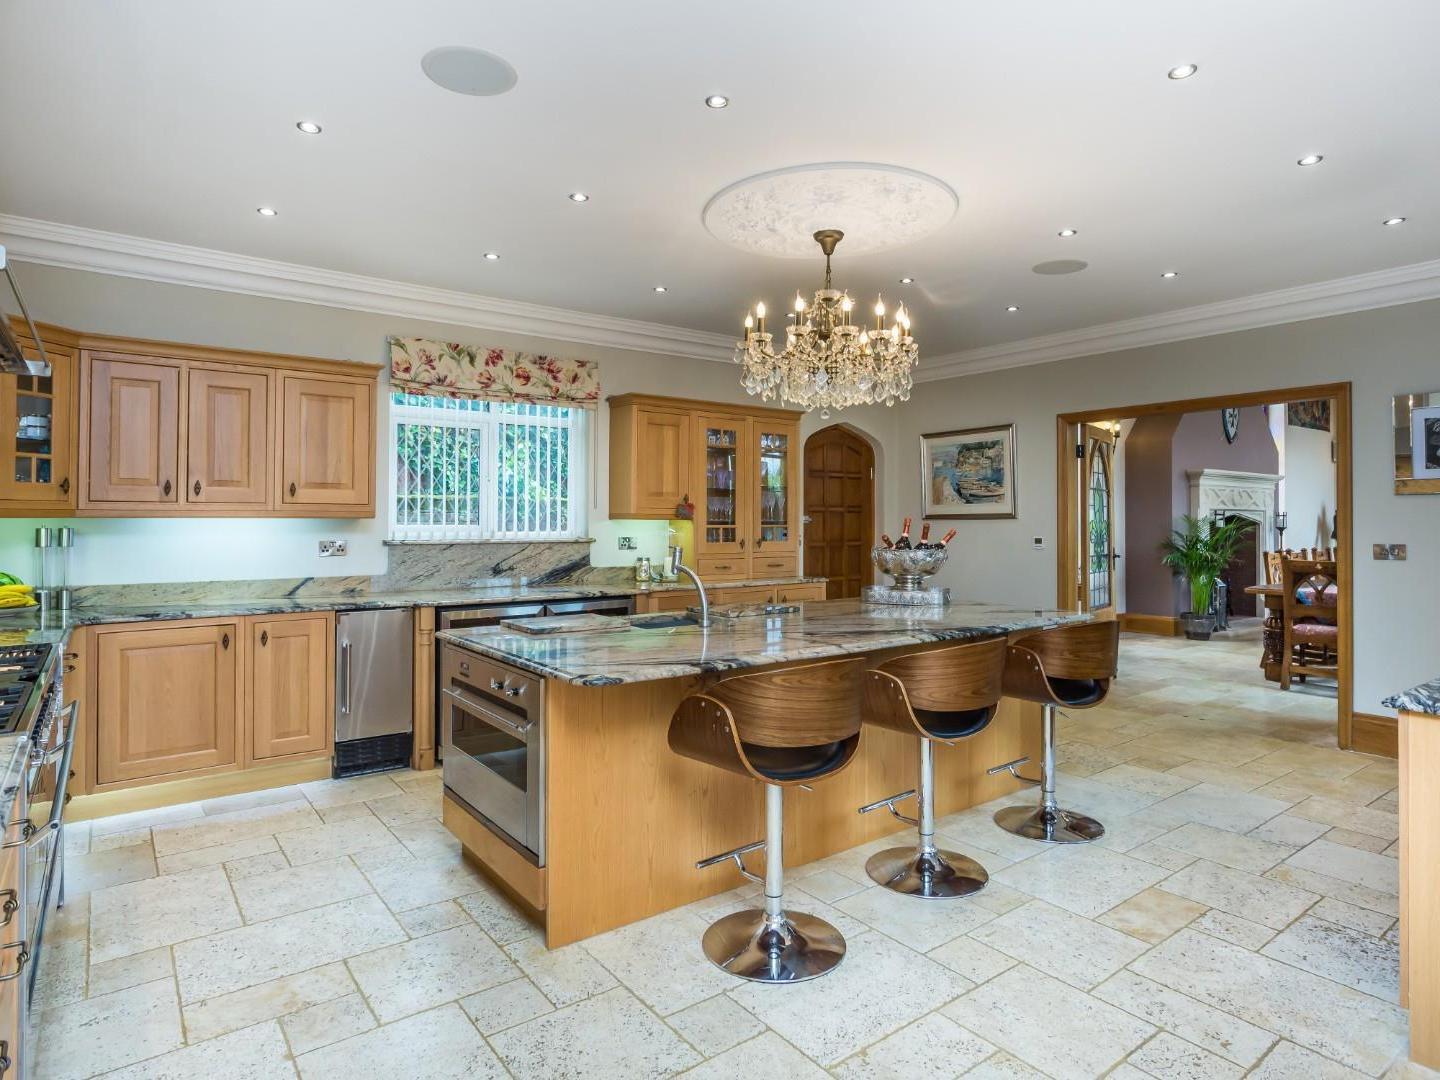 Here are the 10 most expensive properties in Lancashire, according to Zoopla